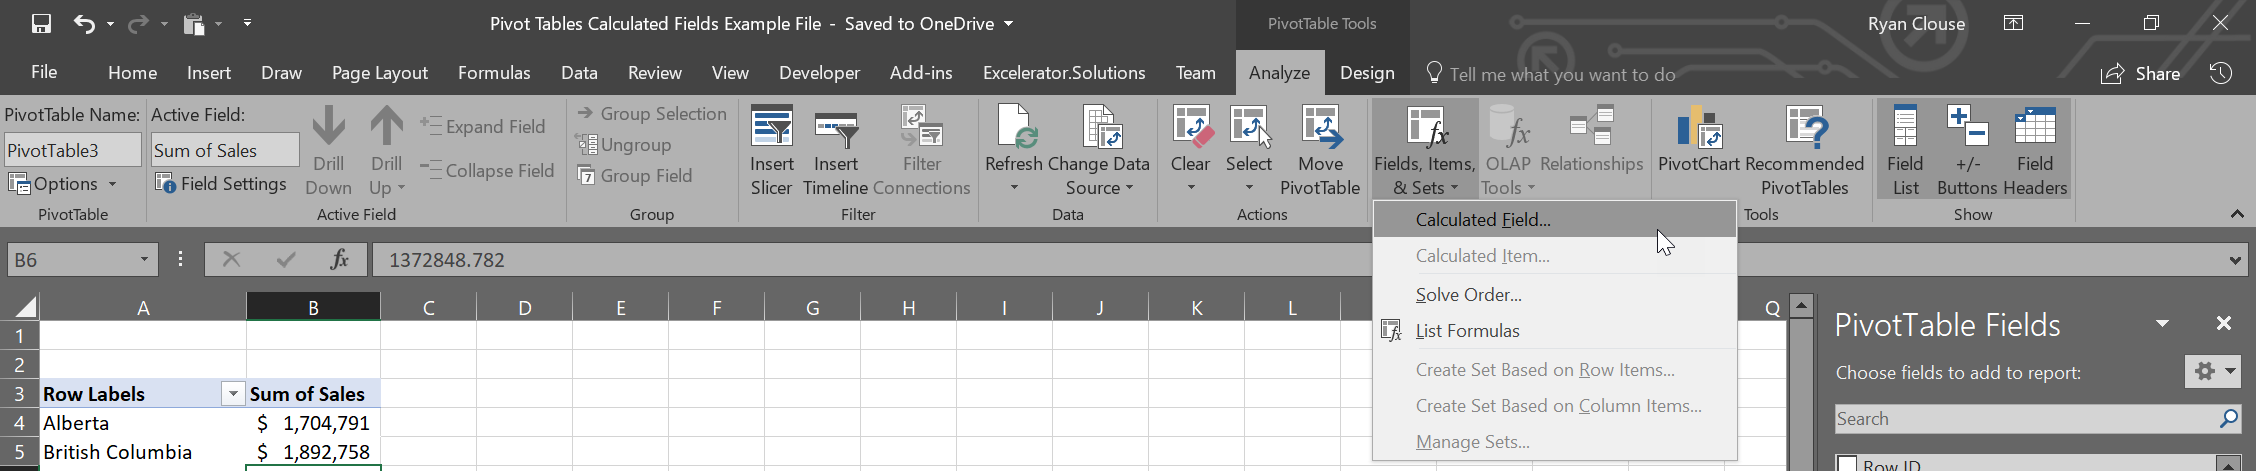 pivot table calculated fields